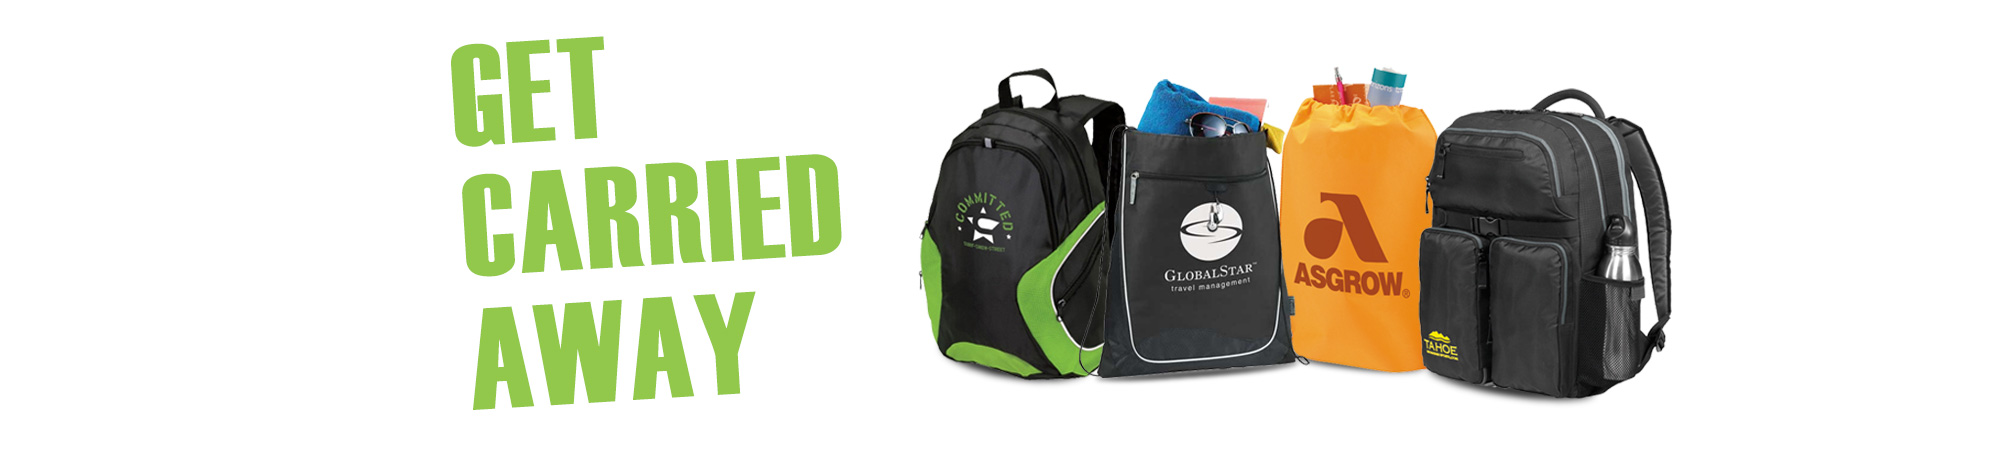 branded-bags-and-backpacks-banner